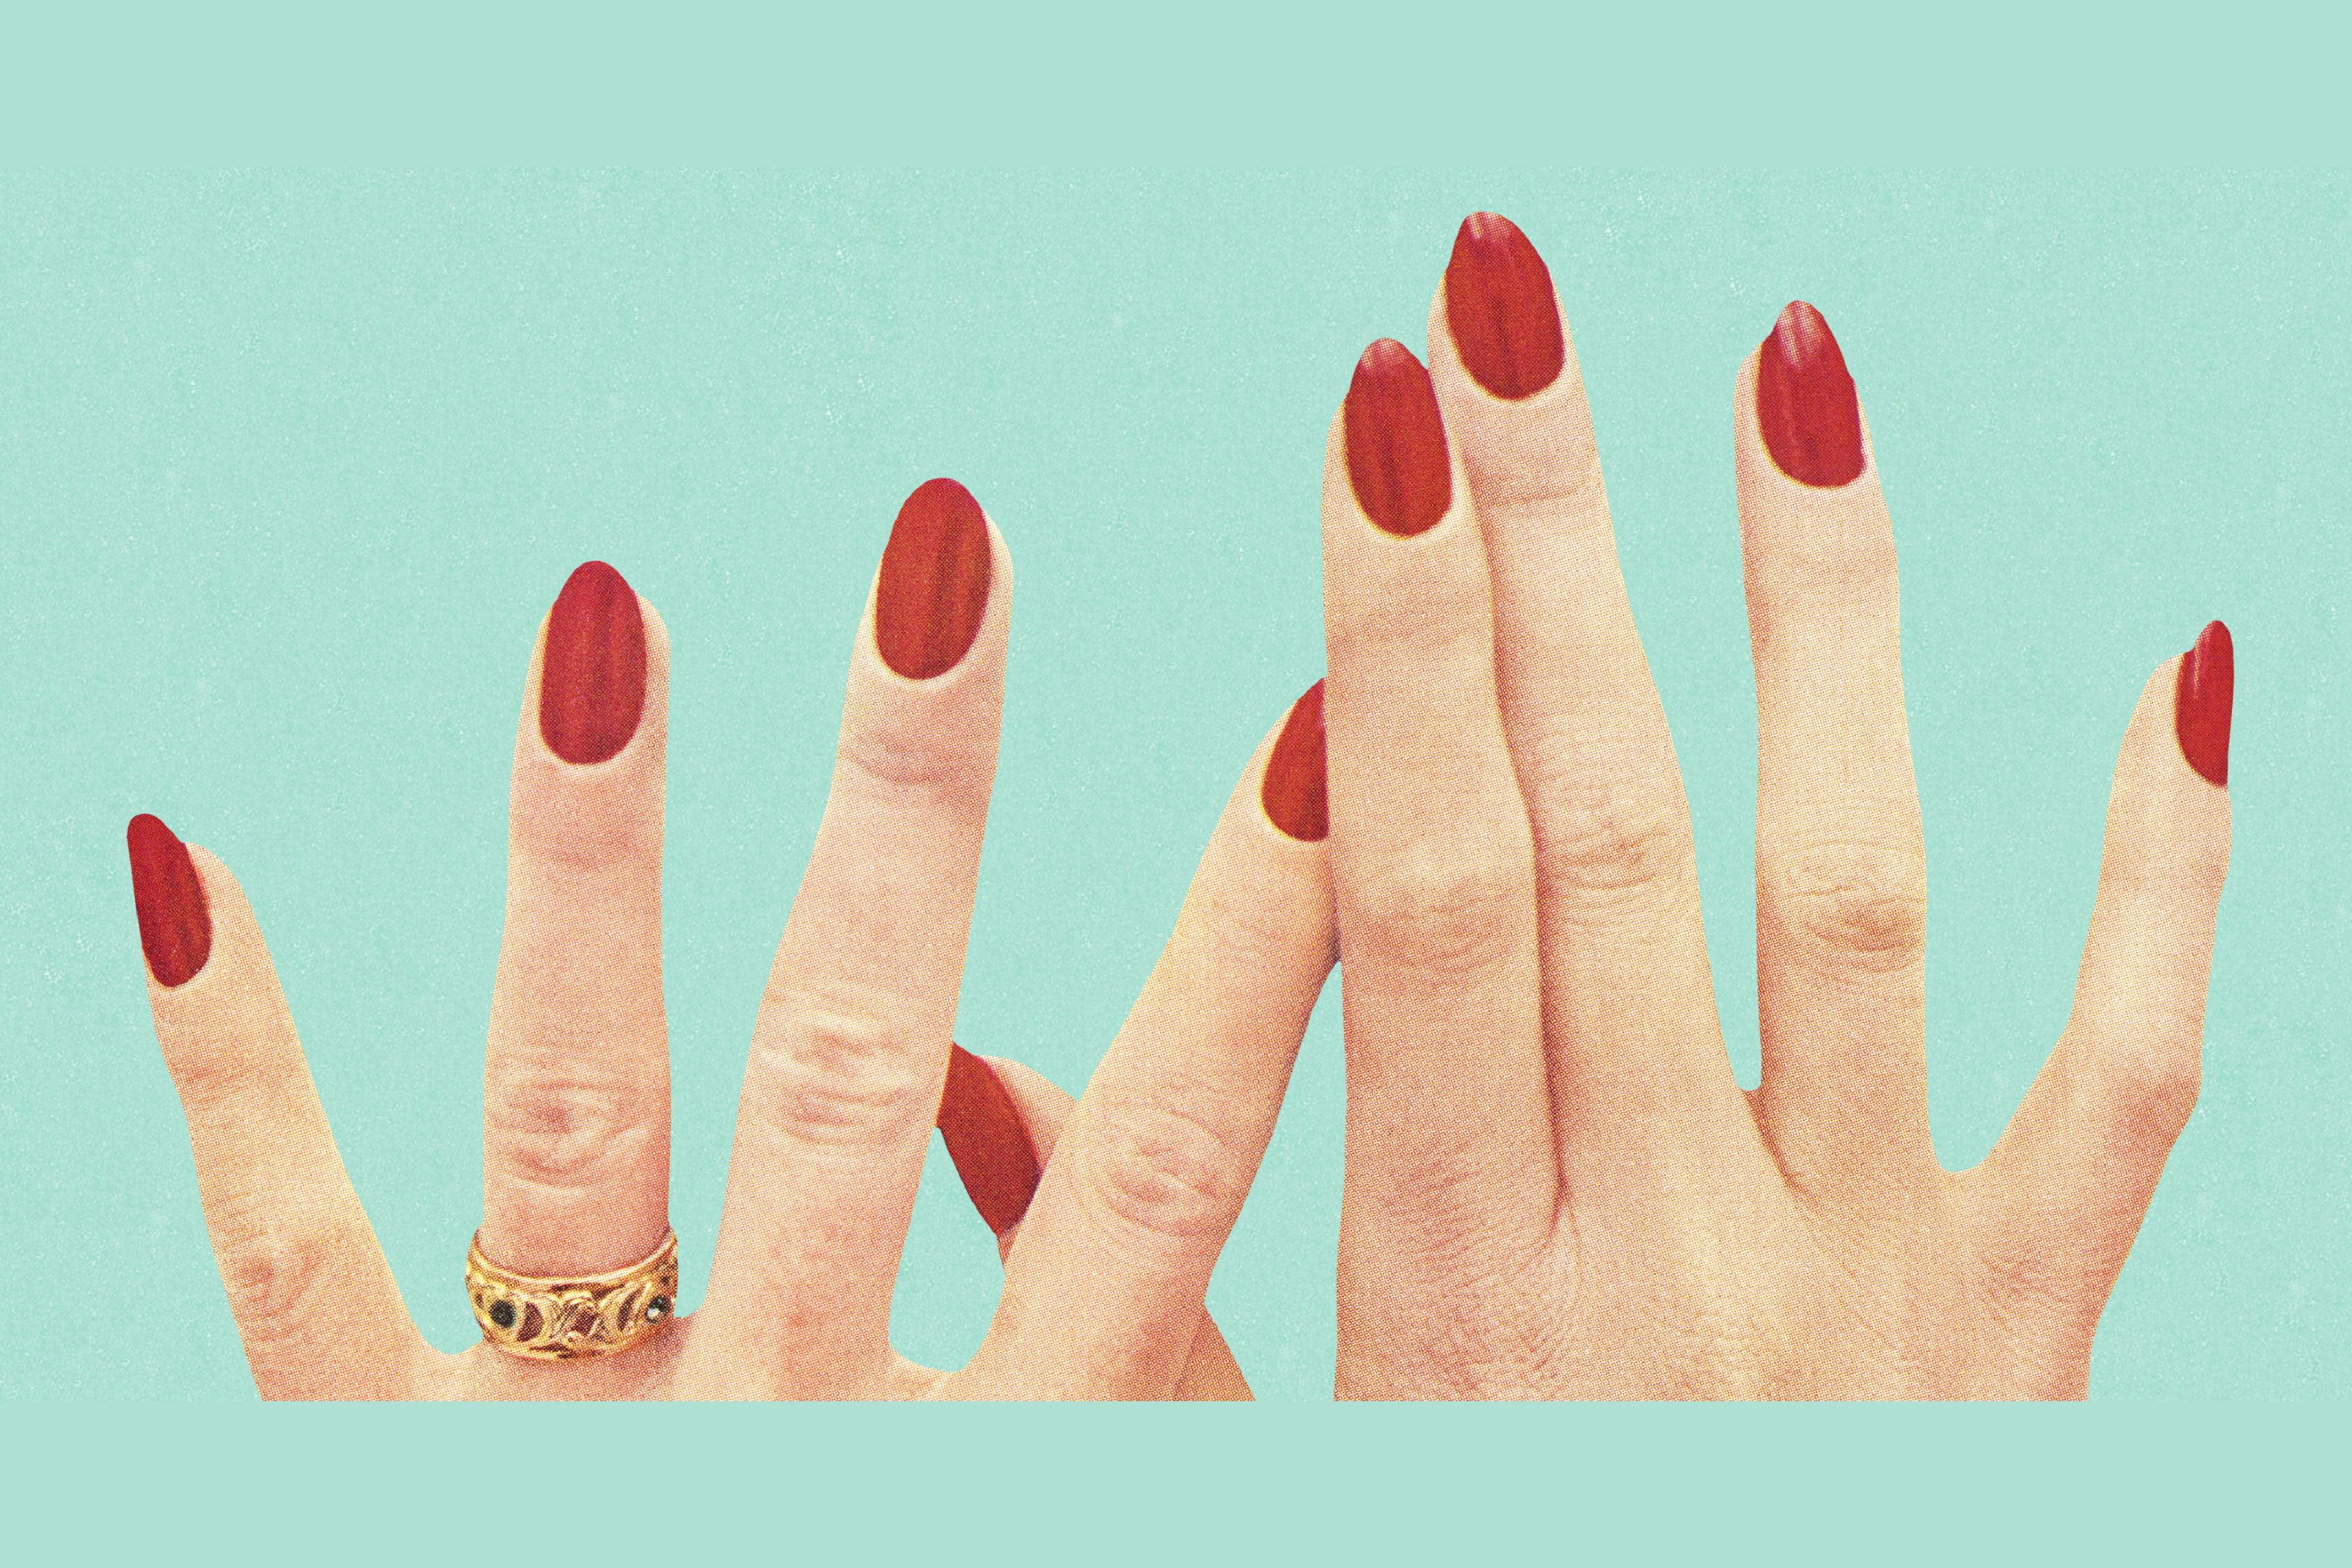 5. "Quiz: What Nail Polish Color Should You Wear?" - wide 2